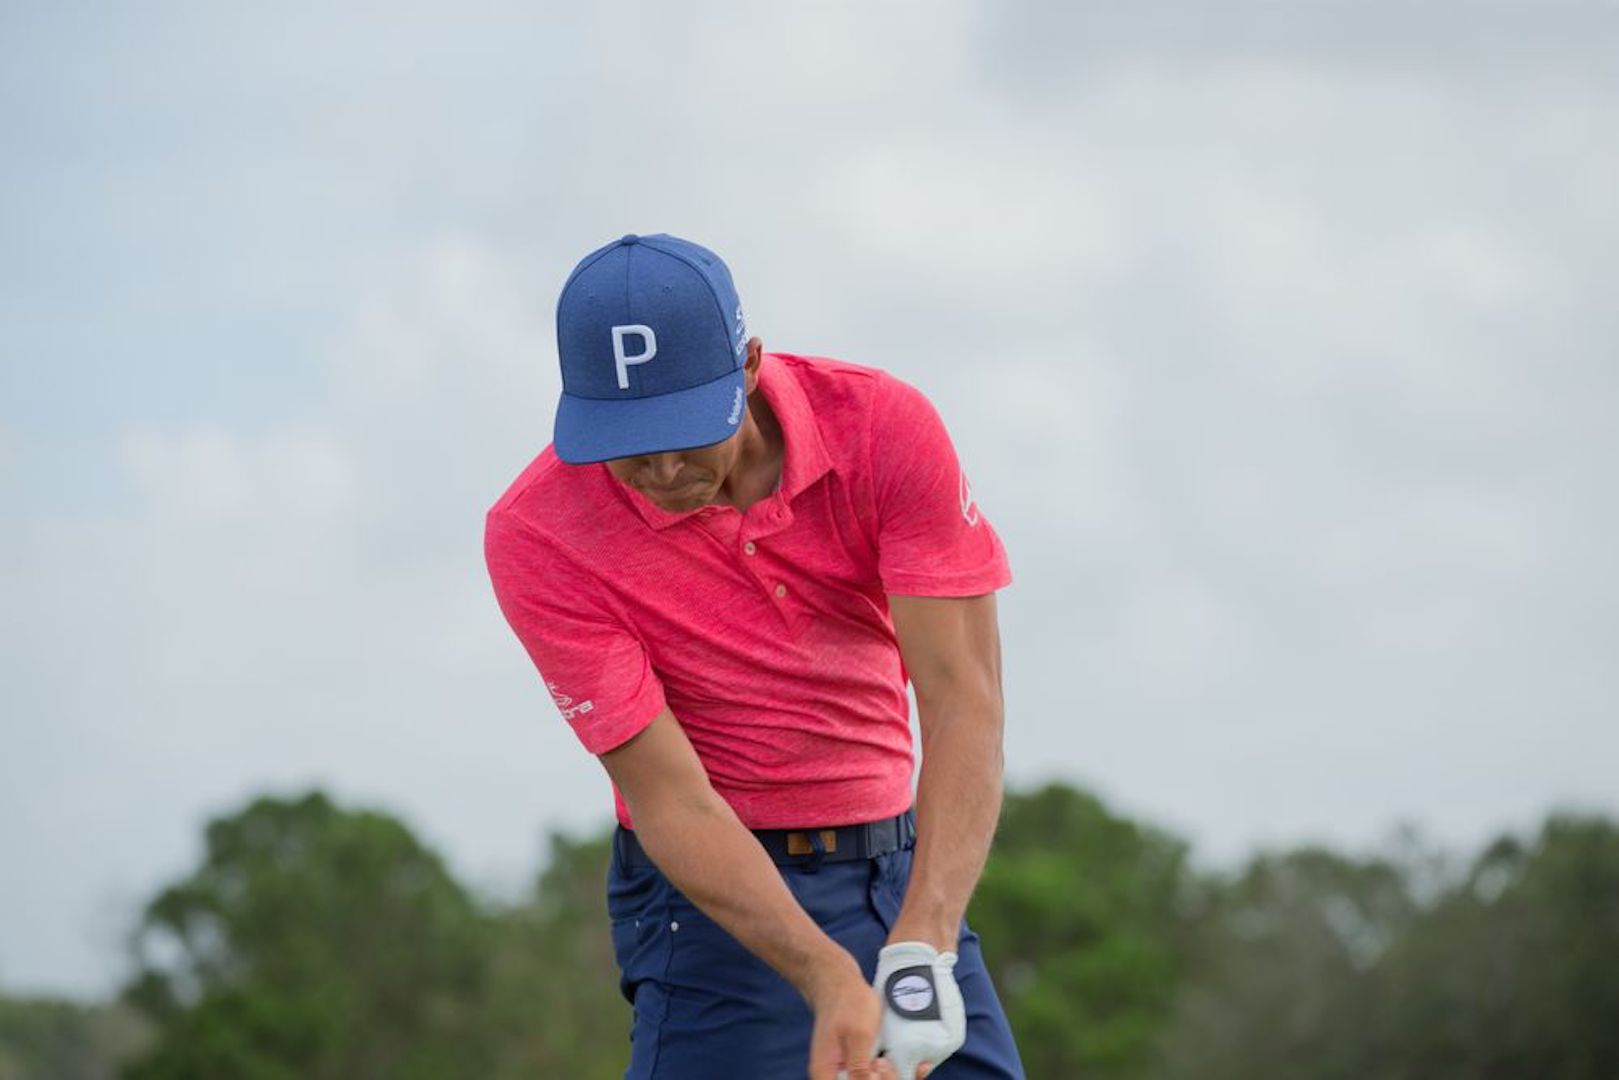 P stand for on Rickie Fowler's P hat 